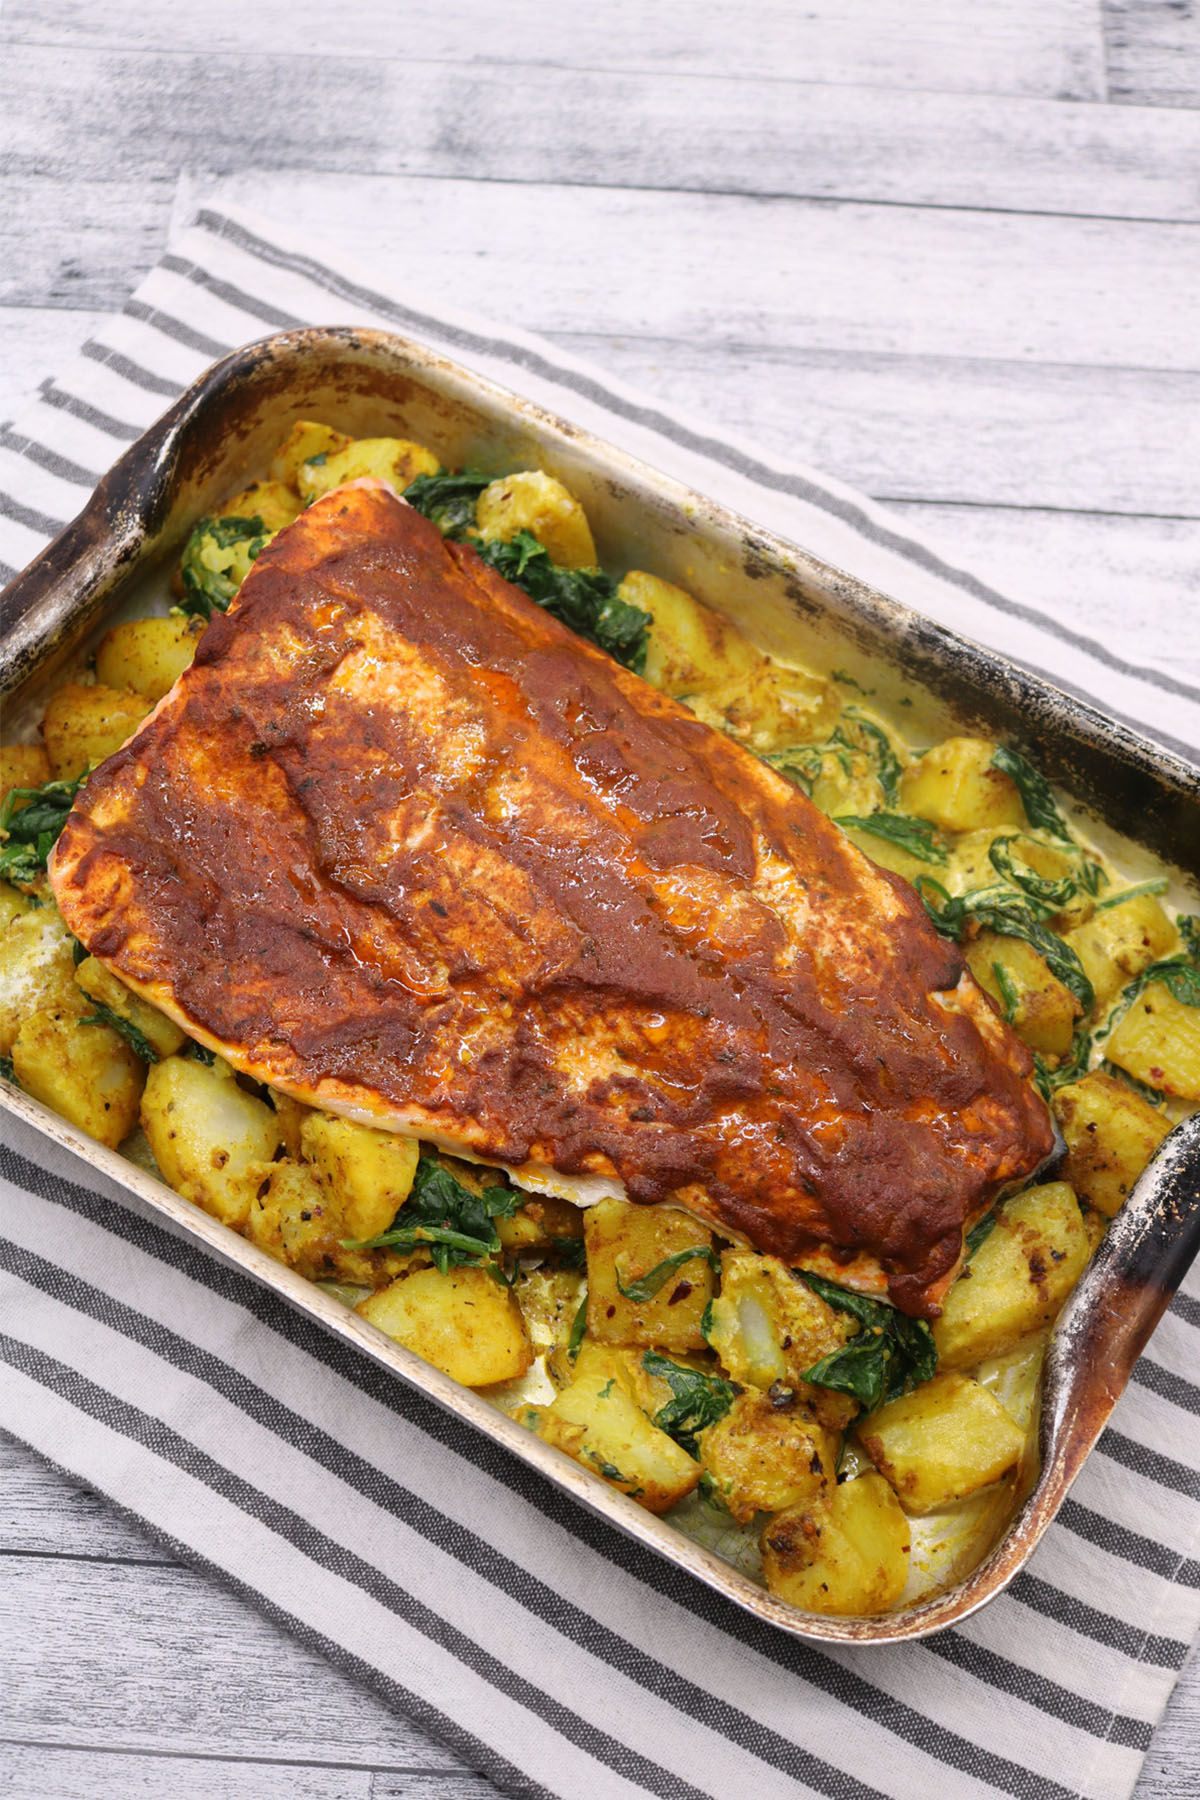 Spiced Salmon with Traybaked Salmon